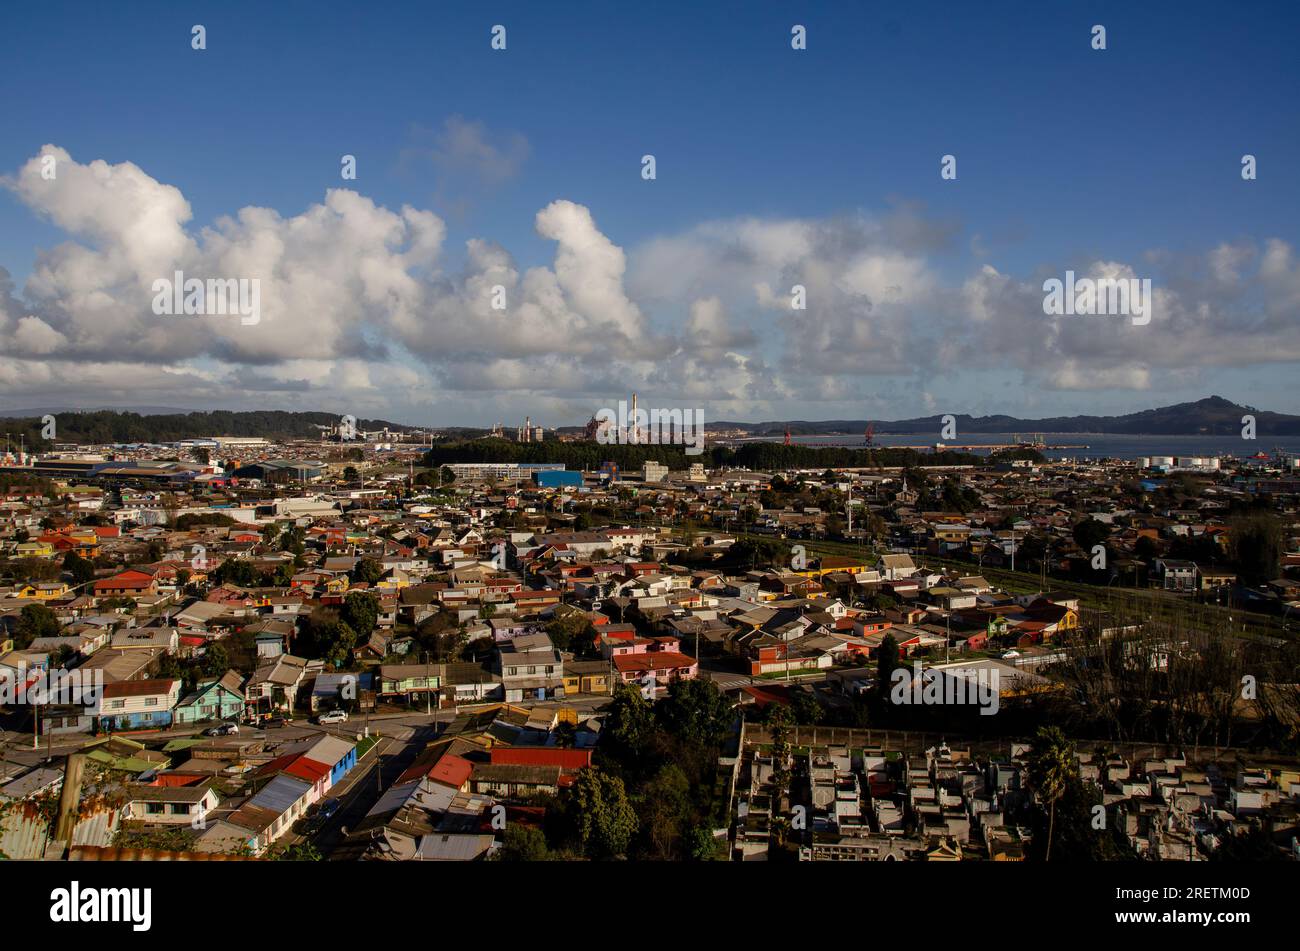 Partial view of the port area in the city of Talcahuano, Chile Stock Photo